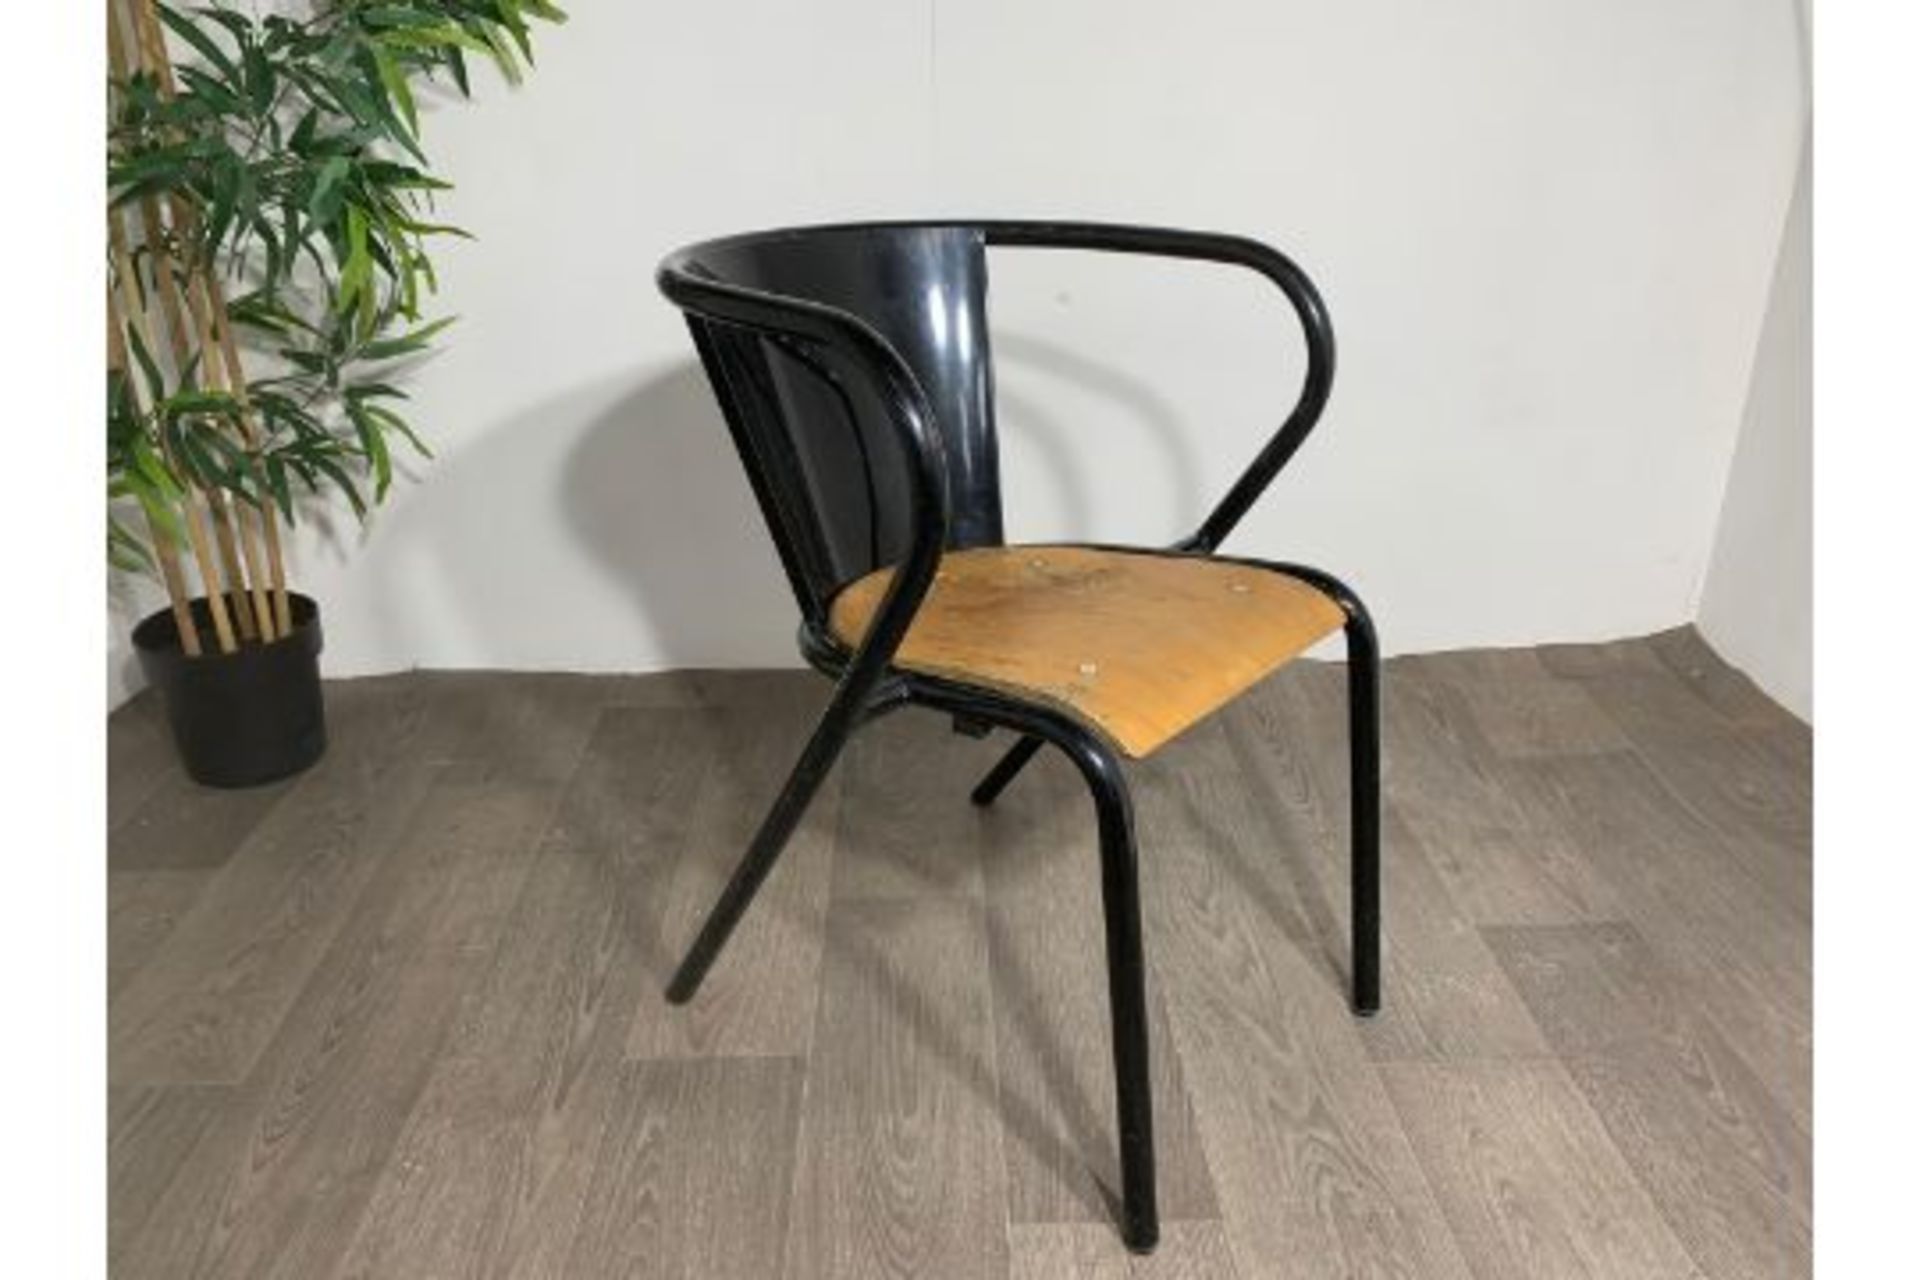 Adico 5008 Black Chair With Wooden Seat x2 - Image 7 of 7